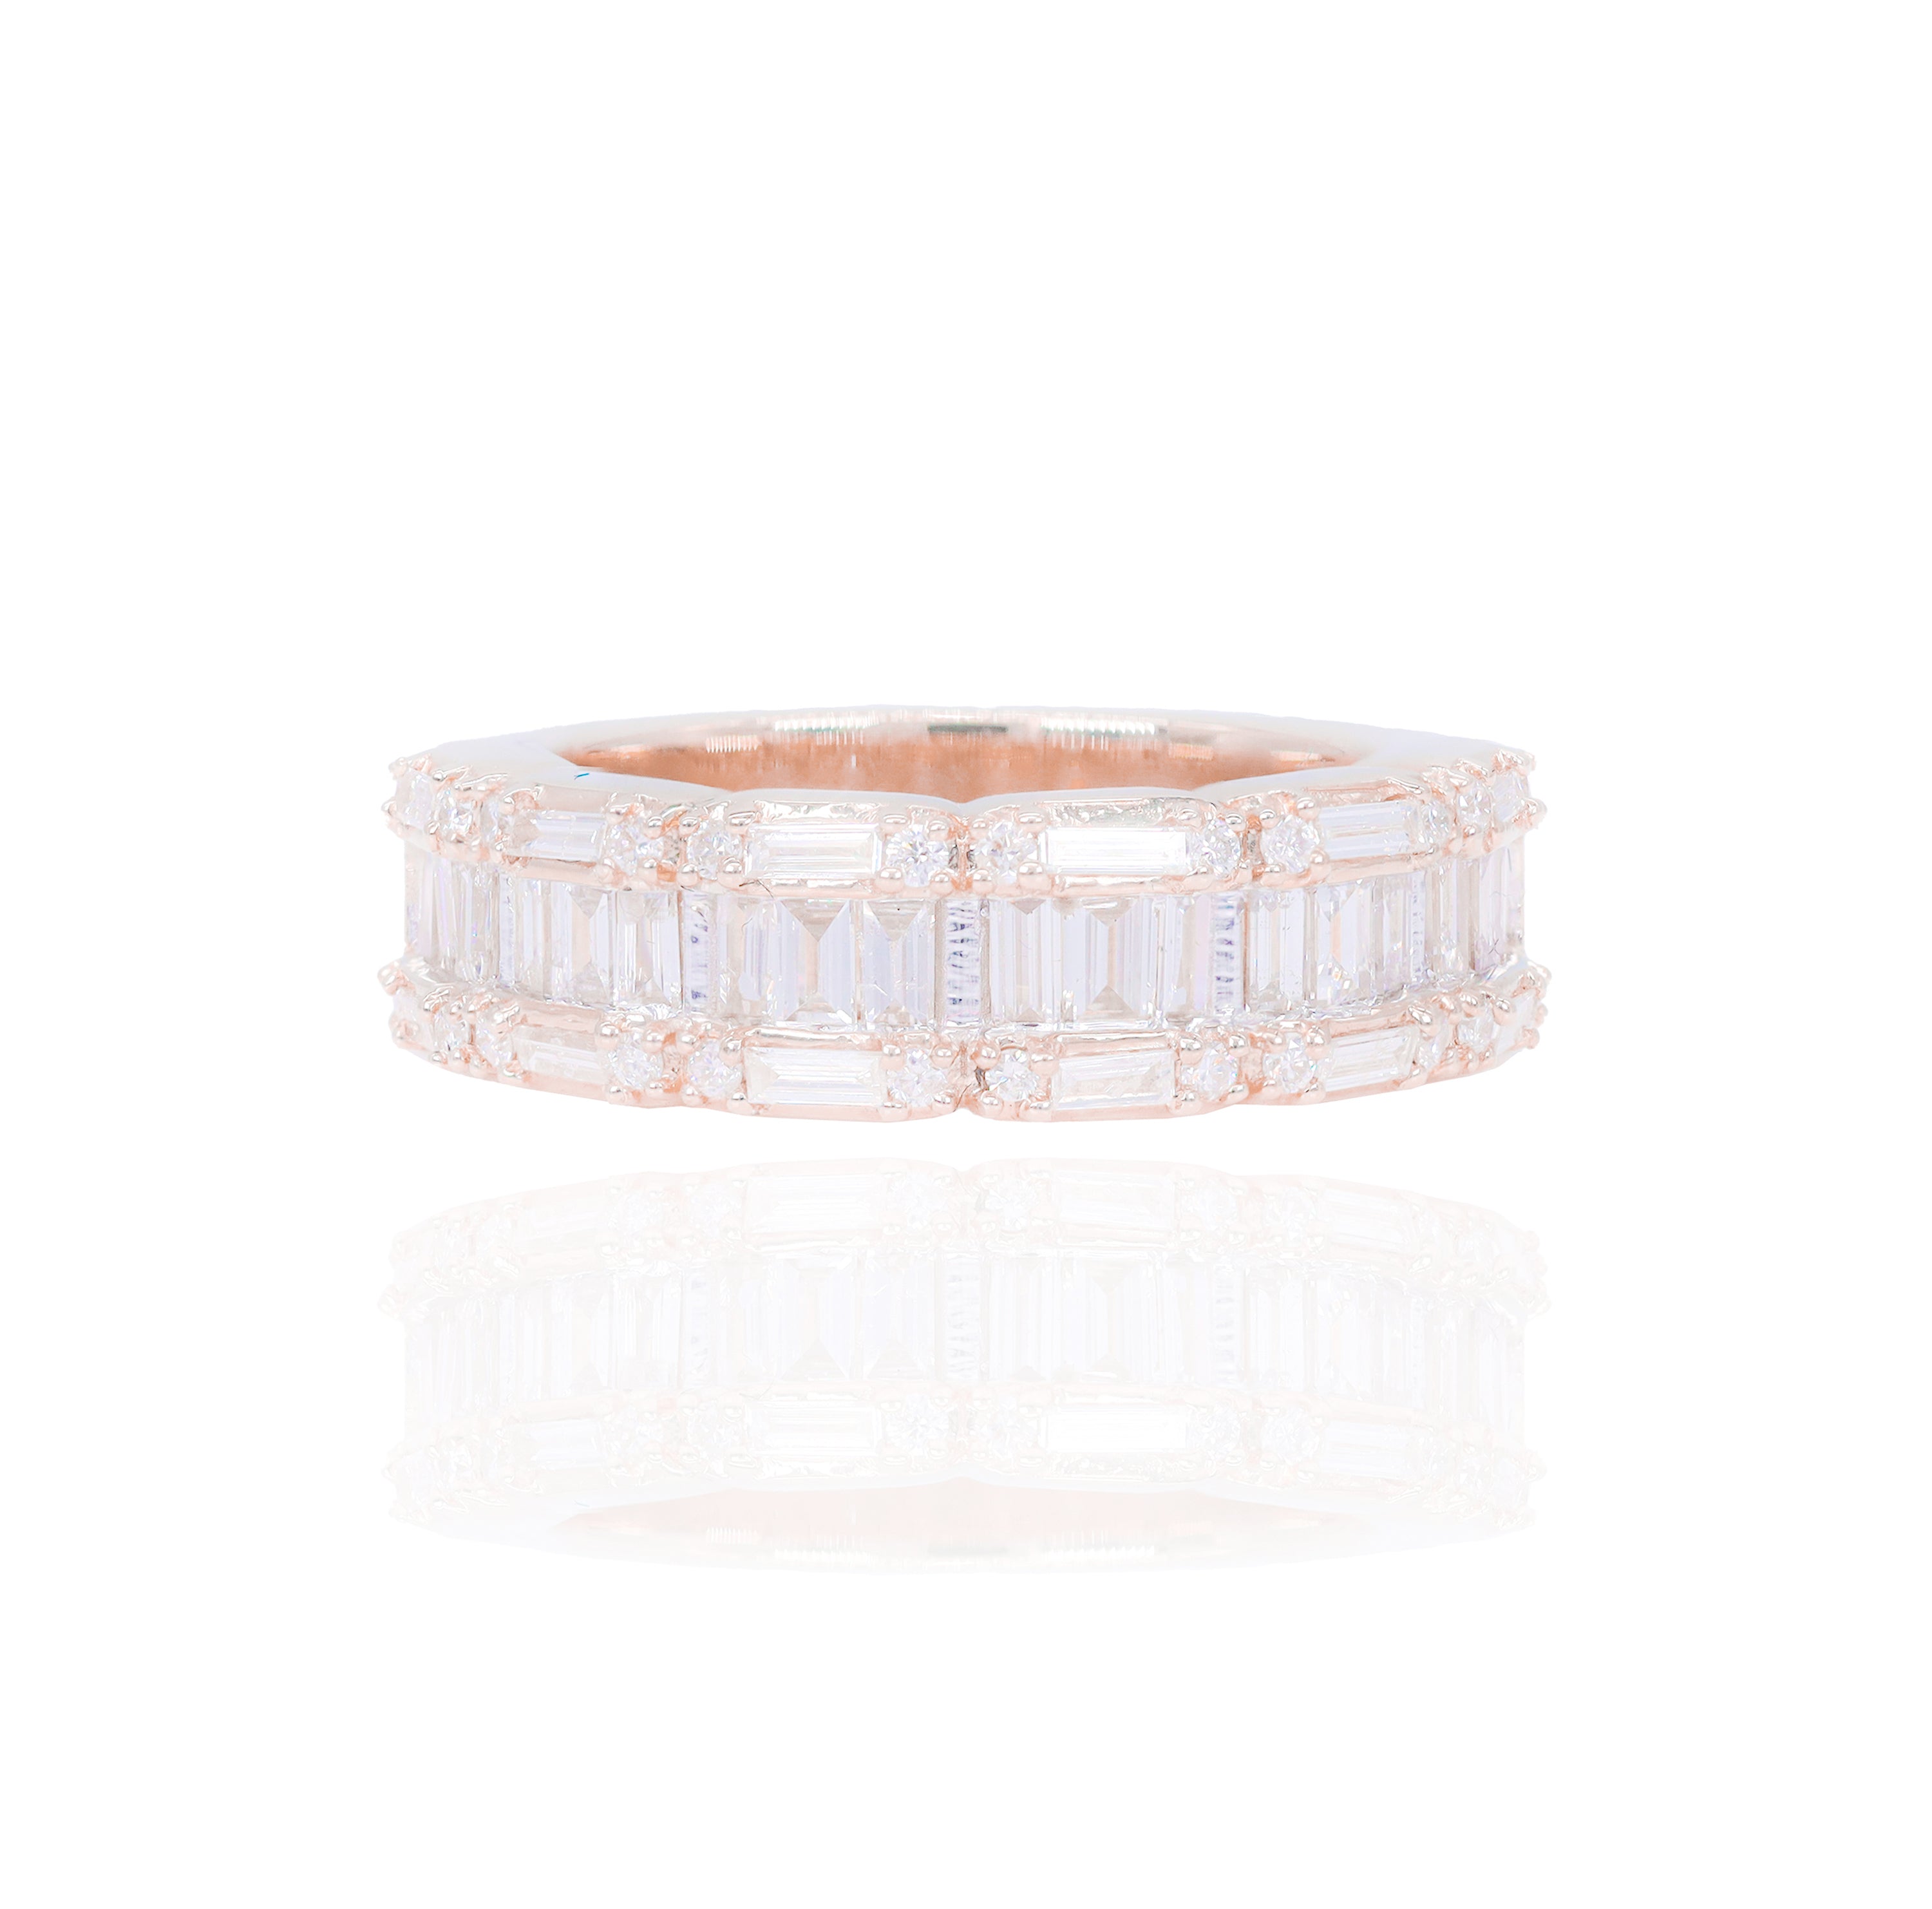 Baguette Sectional Diamond Ring Band